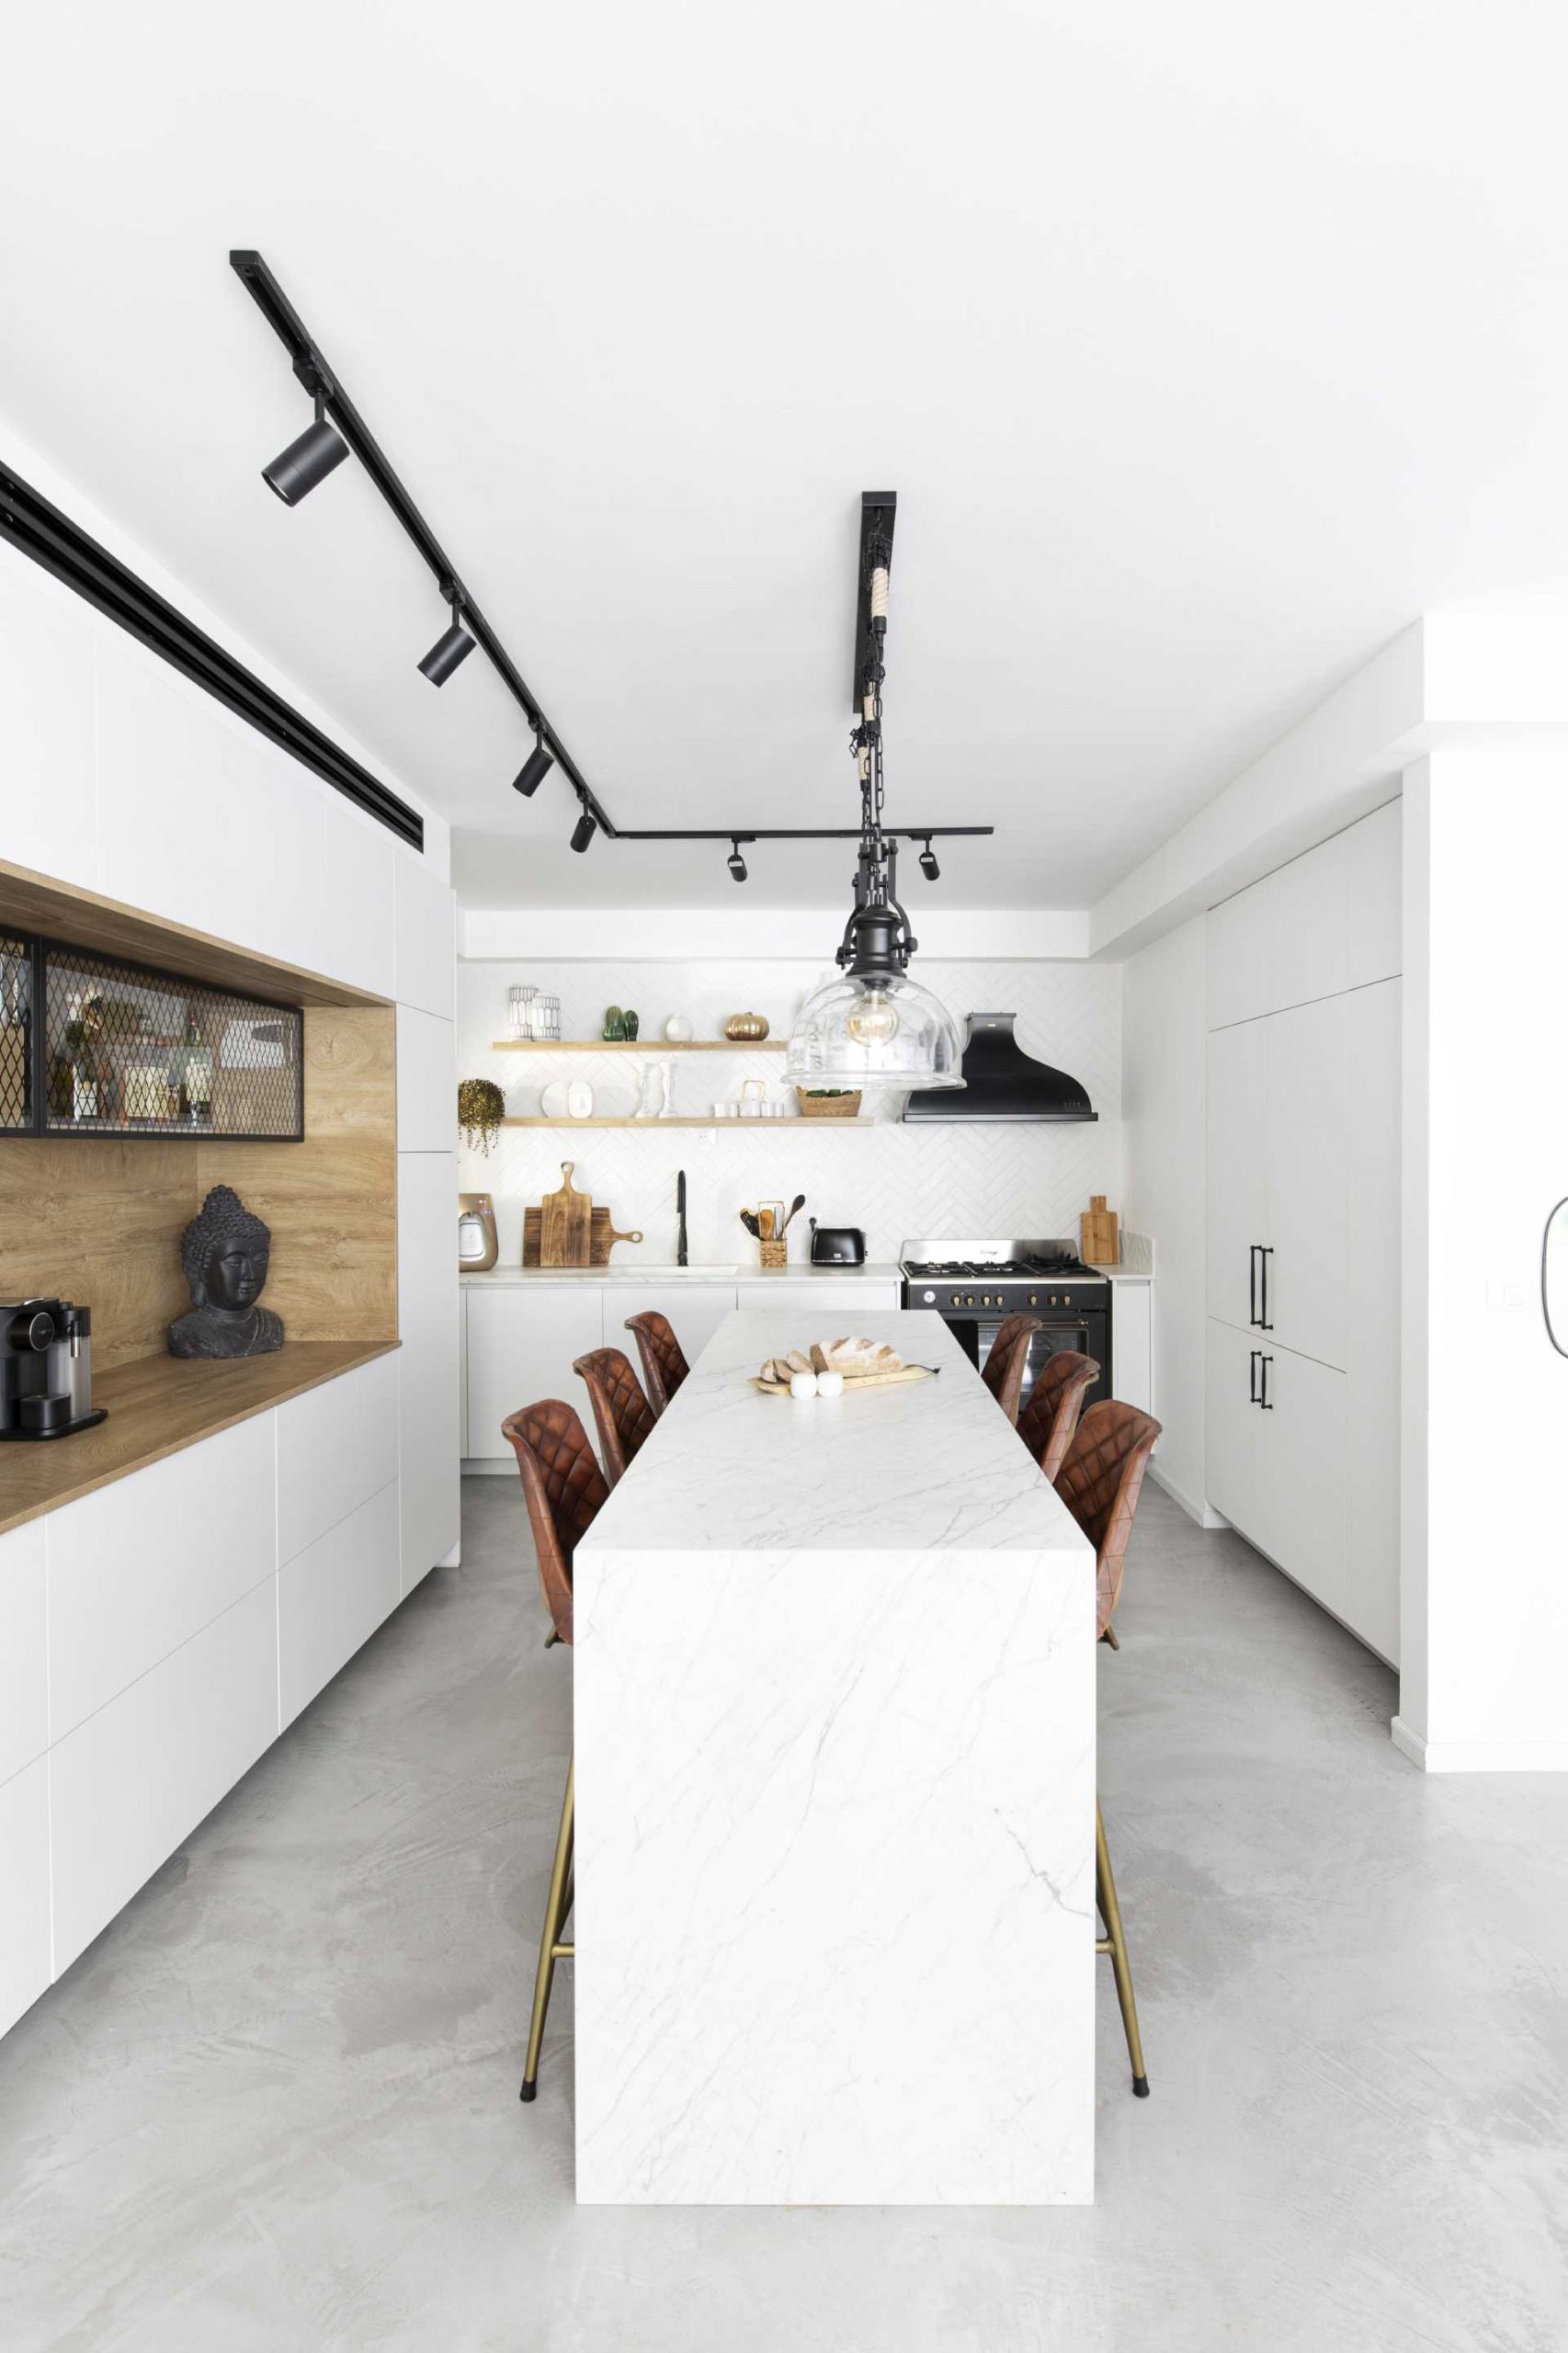 A modern white kitchen interior with wood and matte black design elements, includes an island that double as a dining table.